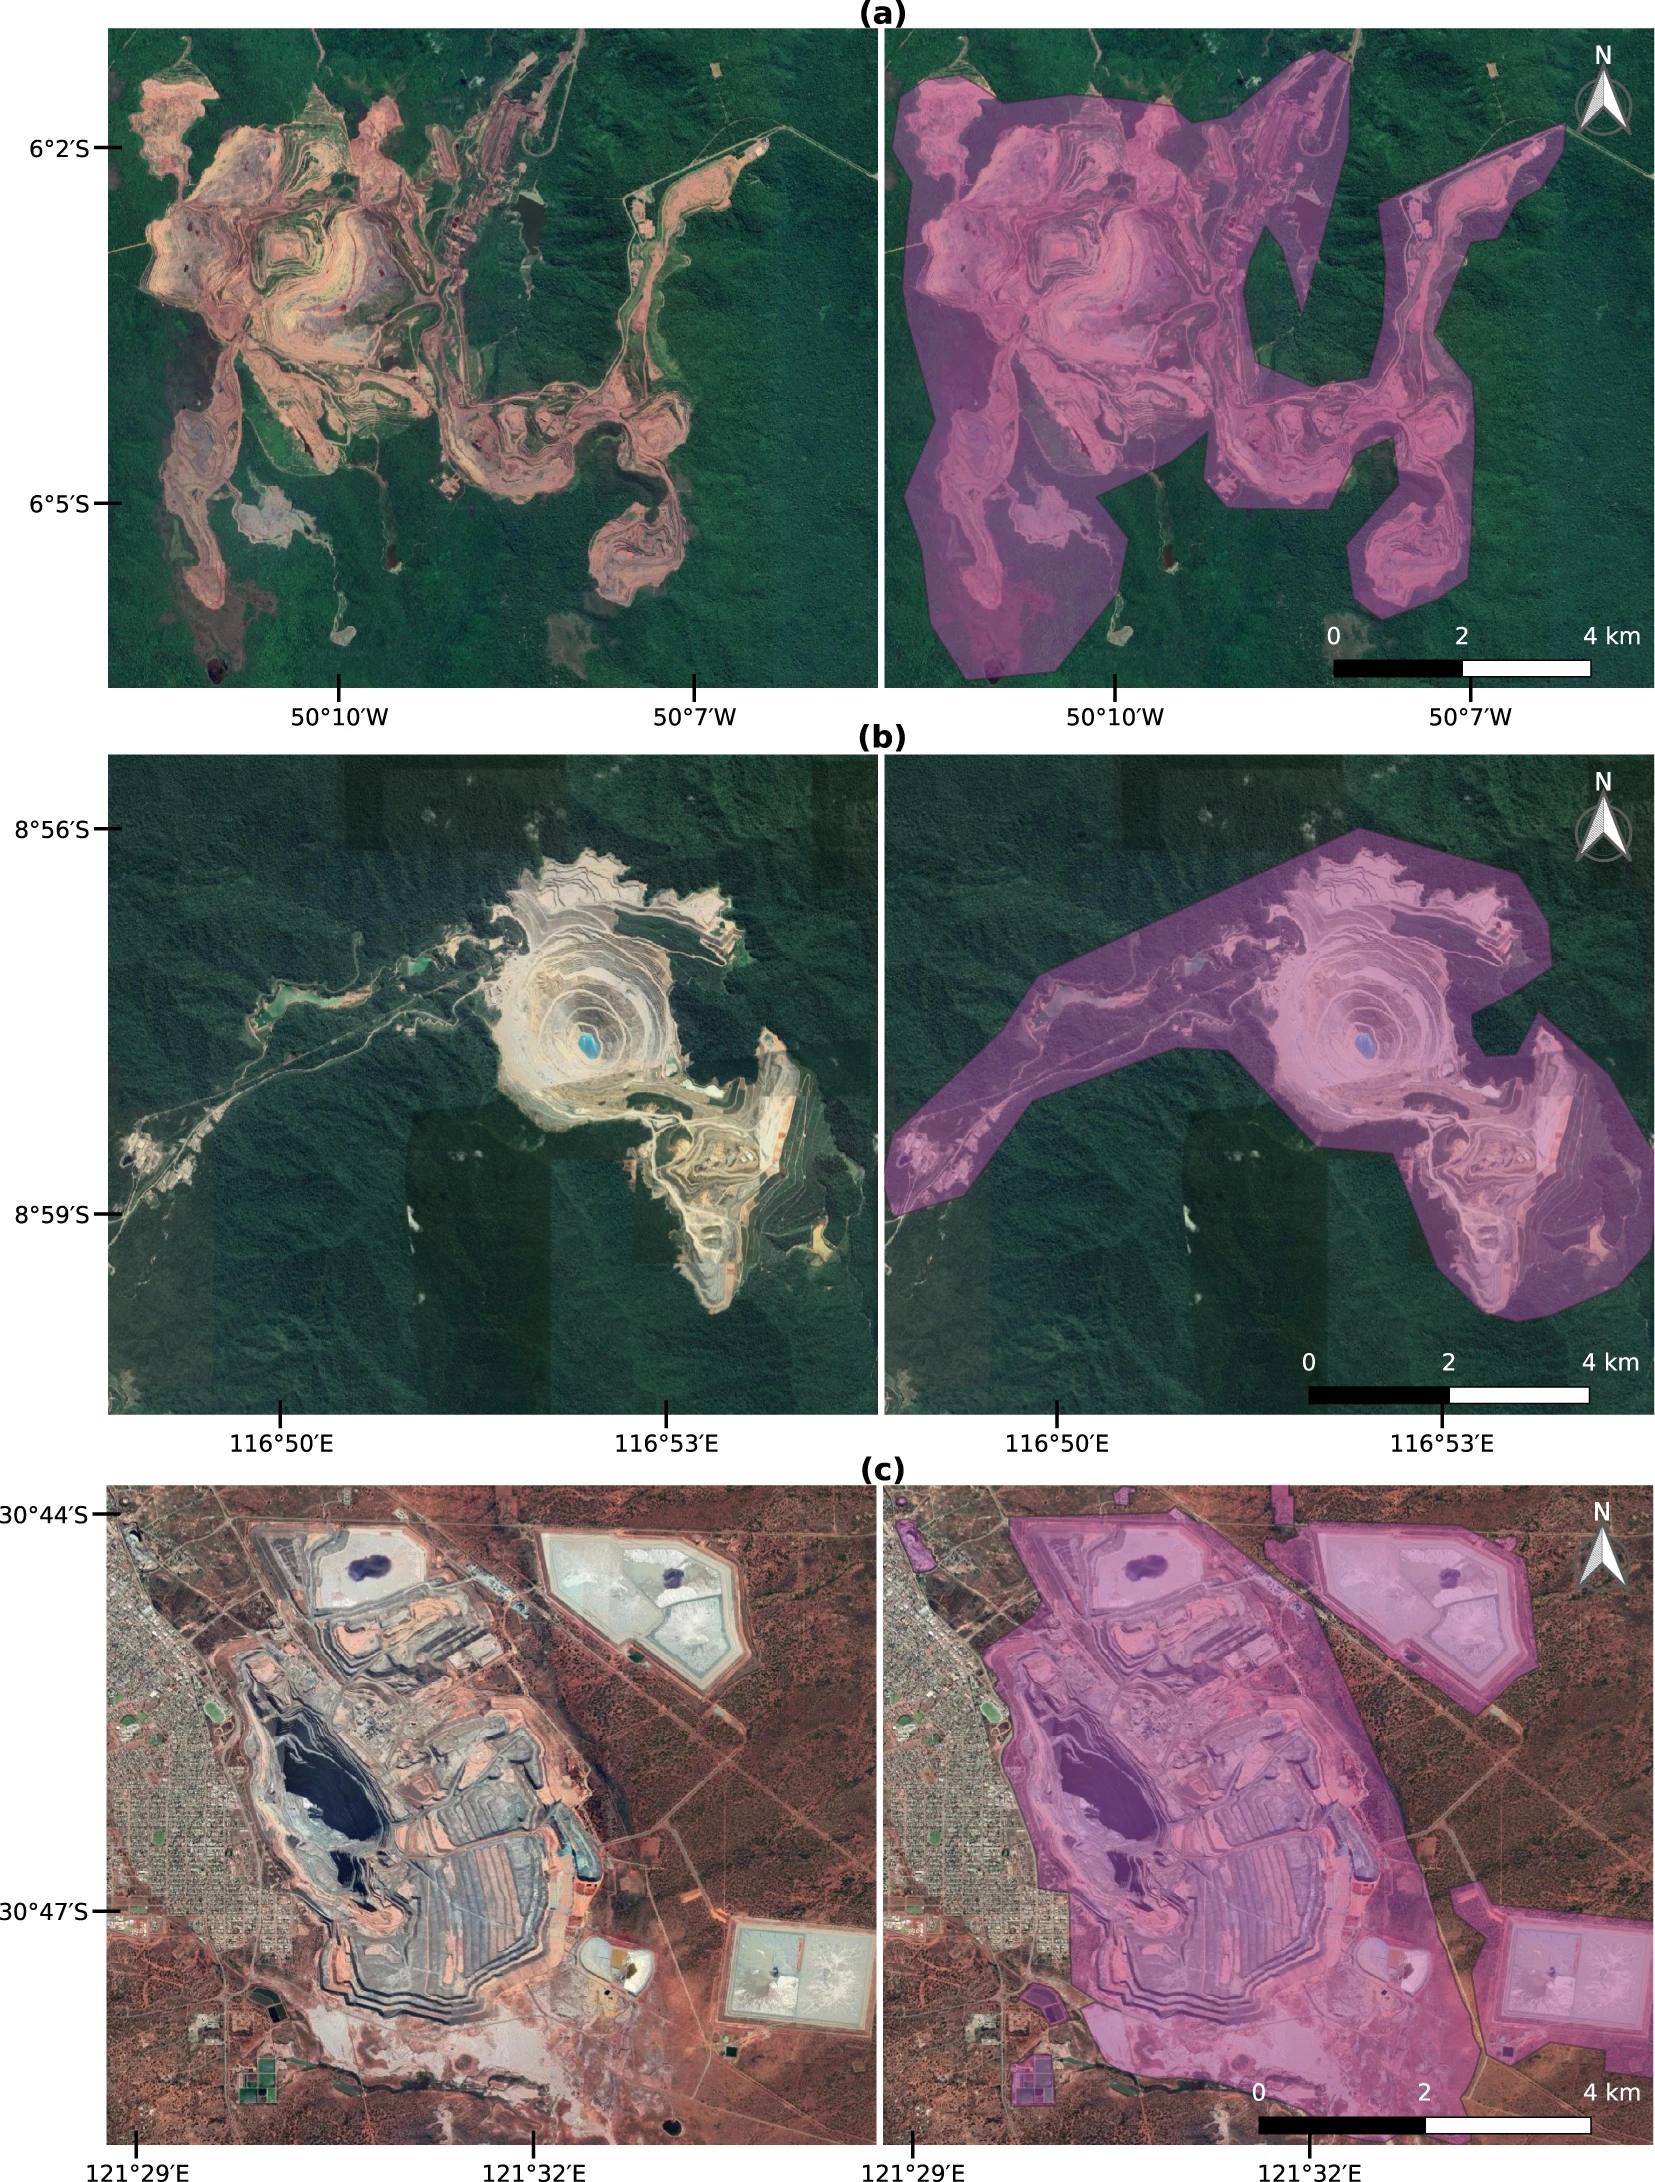 Examples of mapped mining polygons with Google Satellite images background. (a) Carajas iron ore mine in Brazil, (b) Batu Hijau copper-gold mine in Indonesia, and (c) Super Pit gold mine in Australia